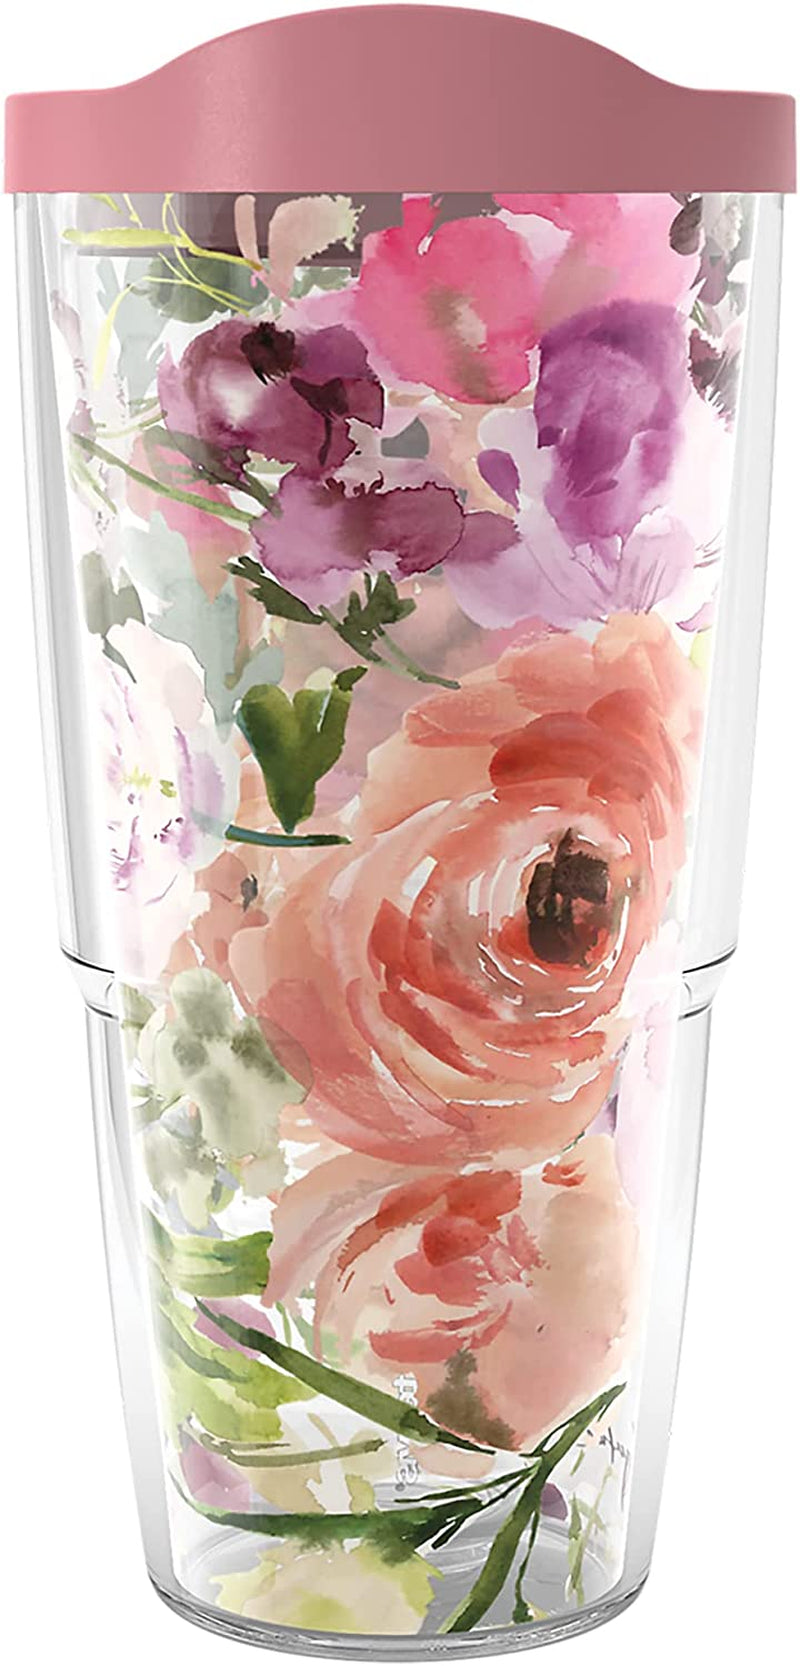 Tervis Made in USA Double Walled Kelly Ventura Floral Collection Insulated Tumbler Cup Keeps Drinks Cold & Hot, 16Oz 4Pk - Classic, Assorted Home & Garden > Kitchen & Dining > Tableware > Drinkware Tervis Heather Rose 24oz - Classic 